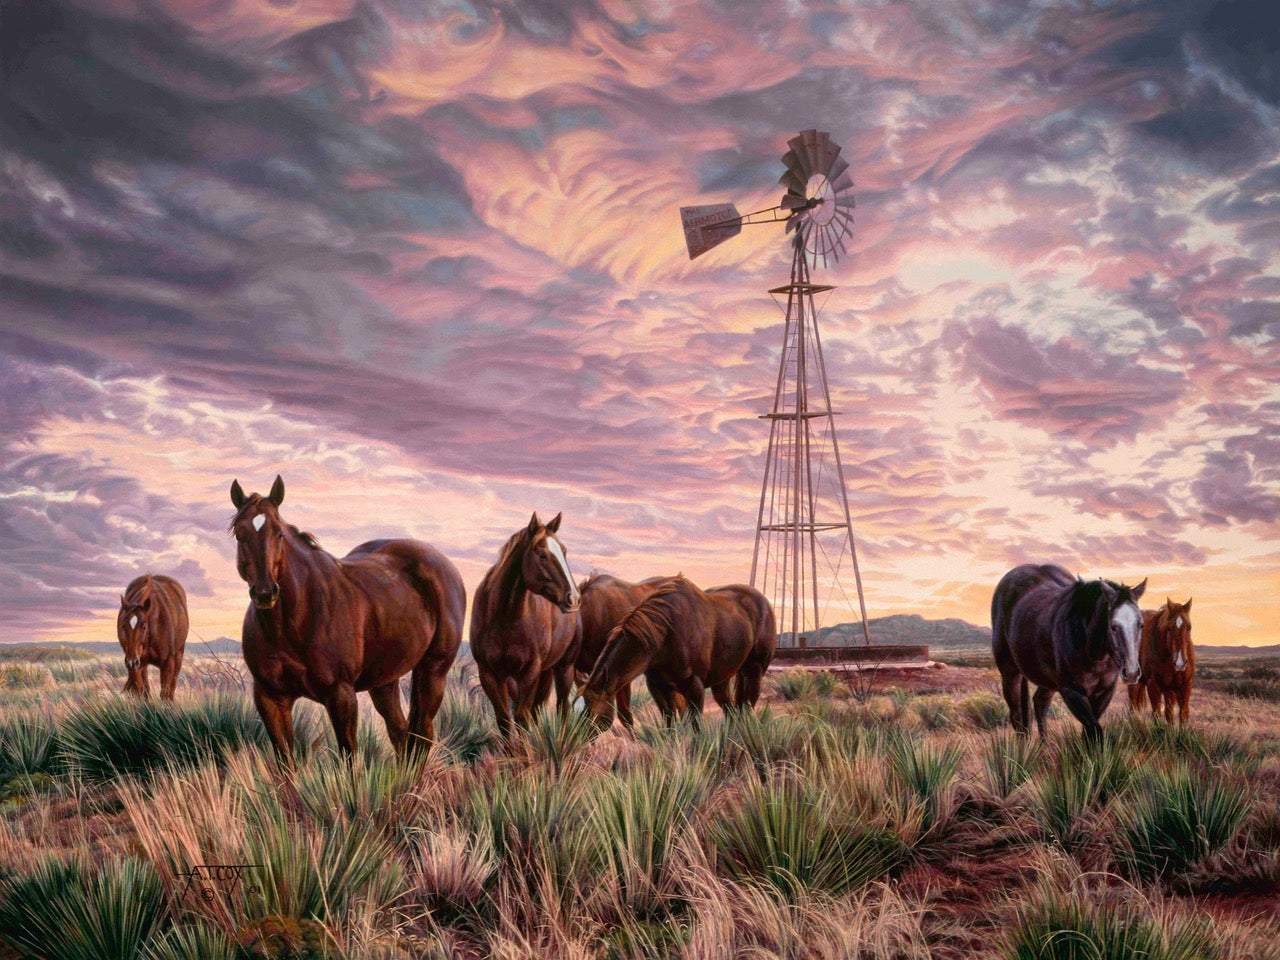 At The End Of The Day painting by Tim Cox  Horses windmills purple clouds sunset